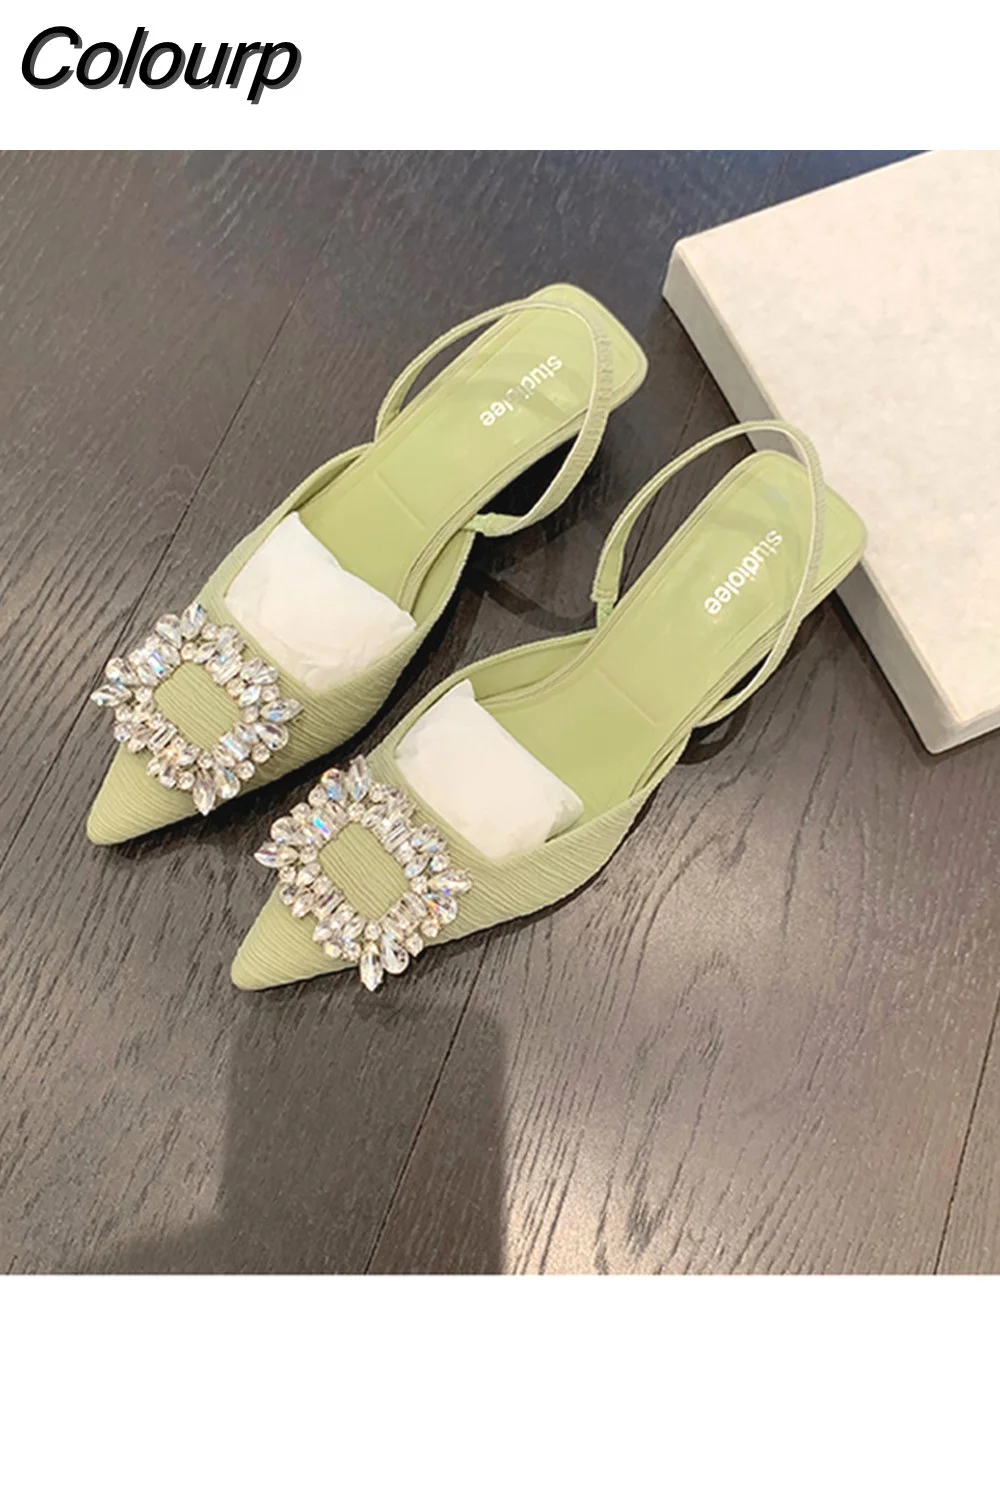 Colourp Summer Ladies Pumps Rhinestone Square Buckle Pointed Toe Shallow High Heel Sandals Sexy Women's Party Wedding Shoes 35-43